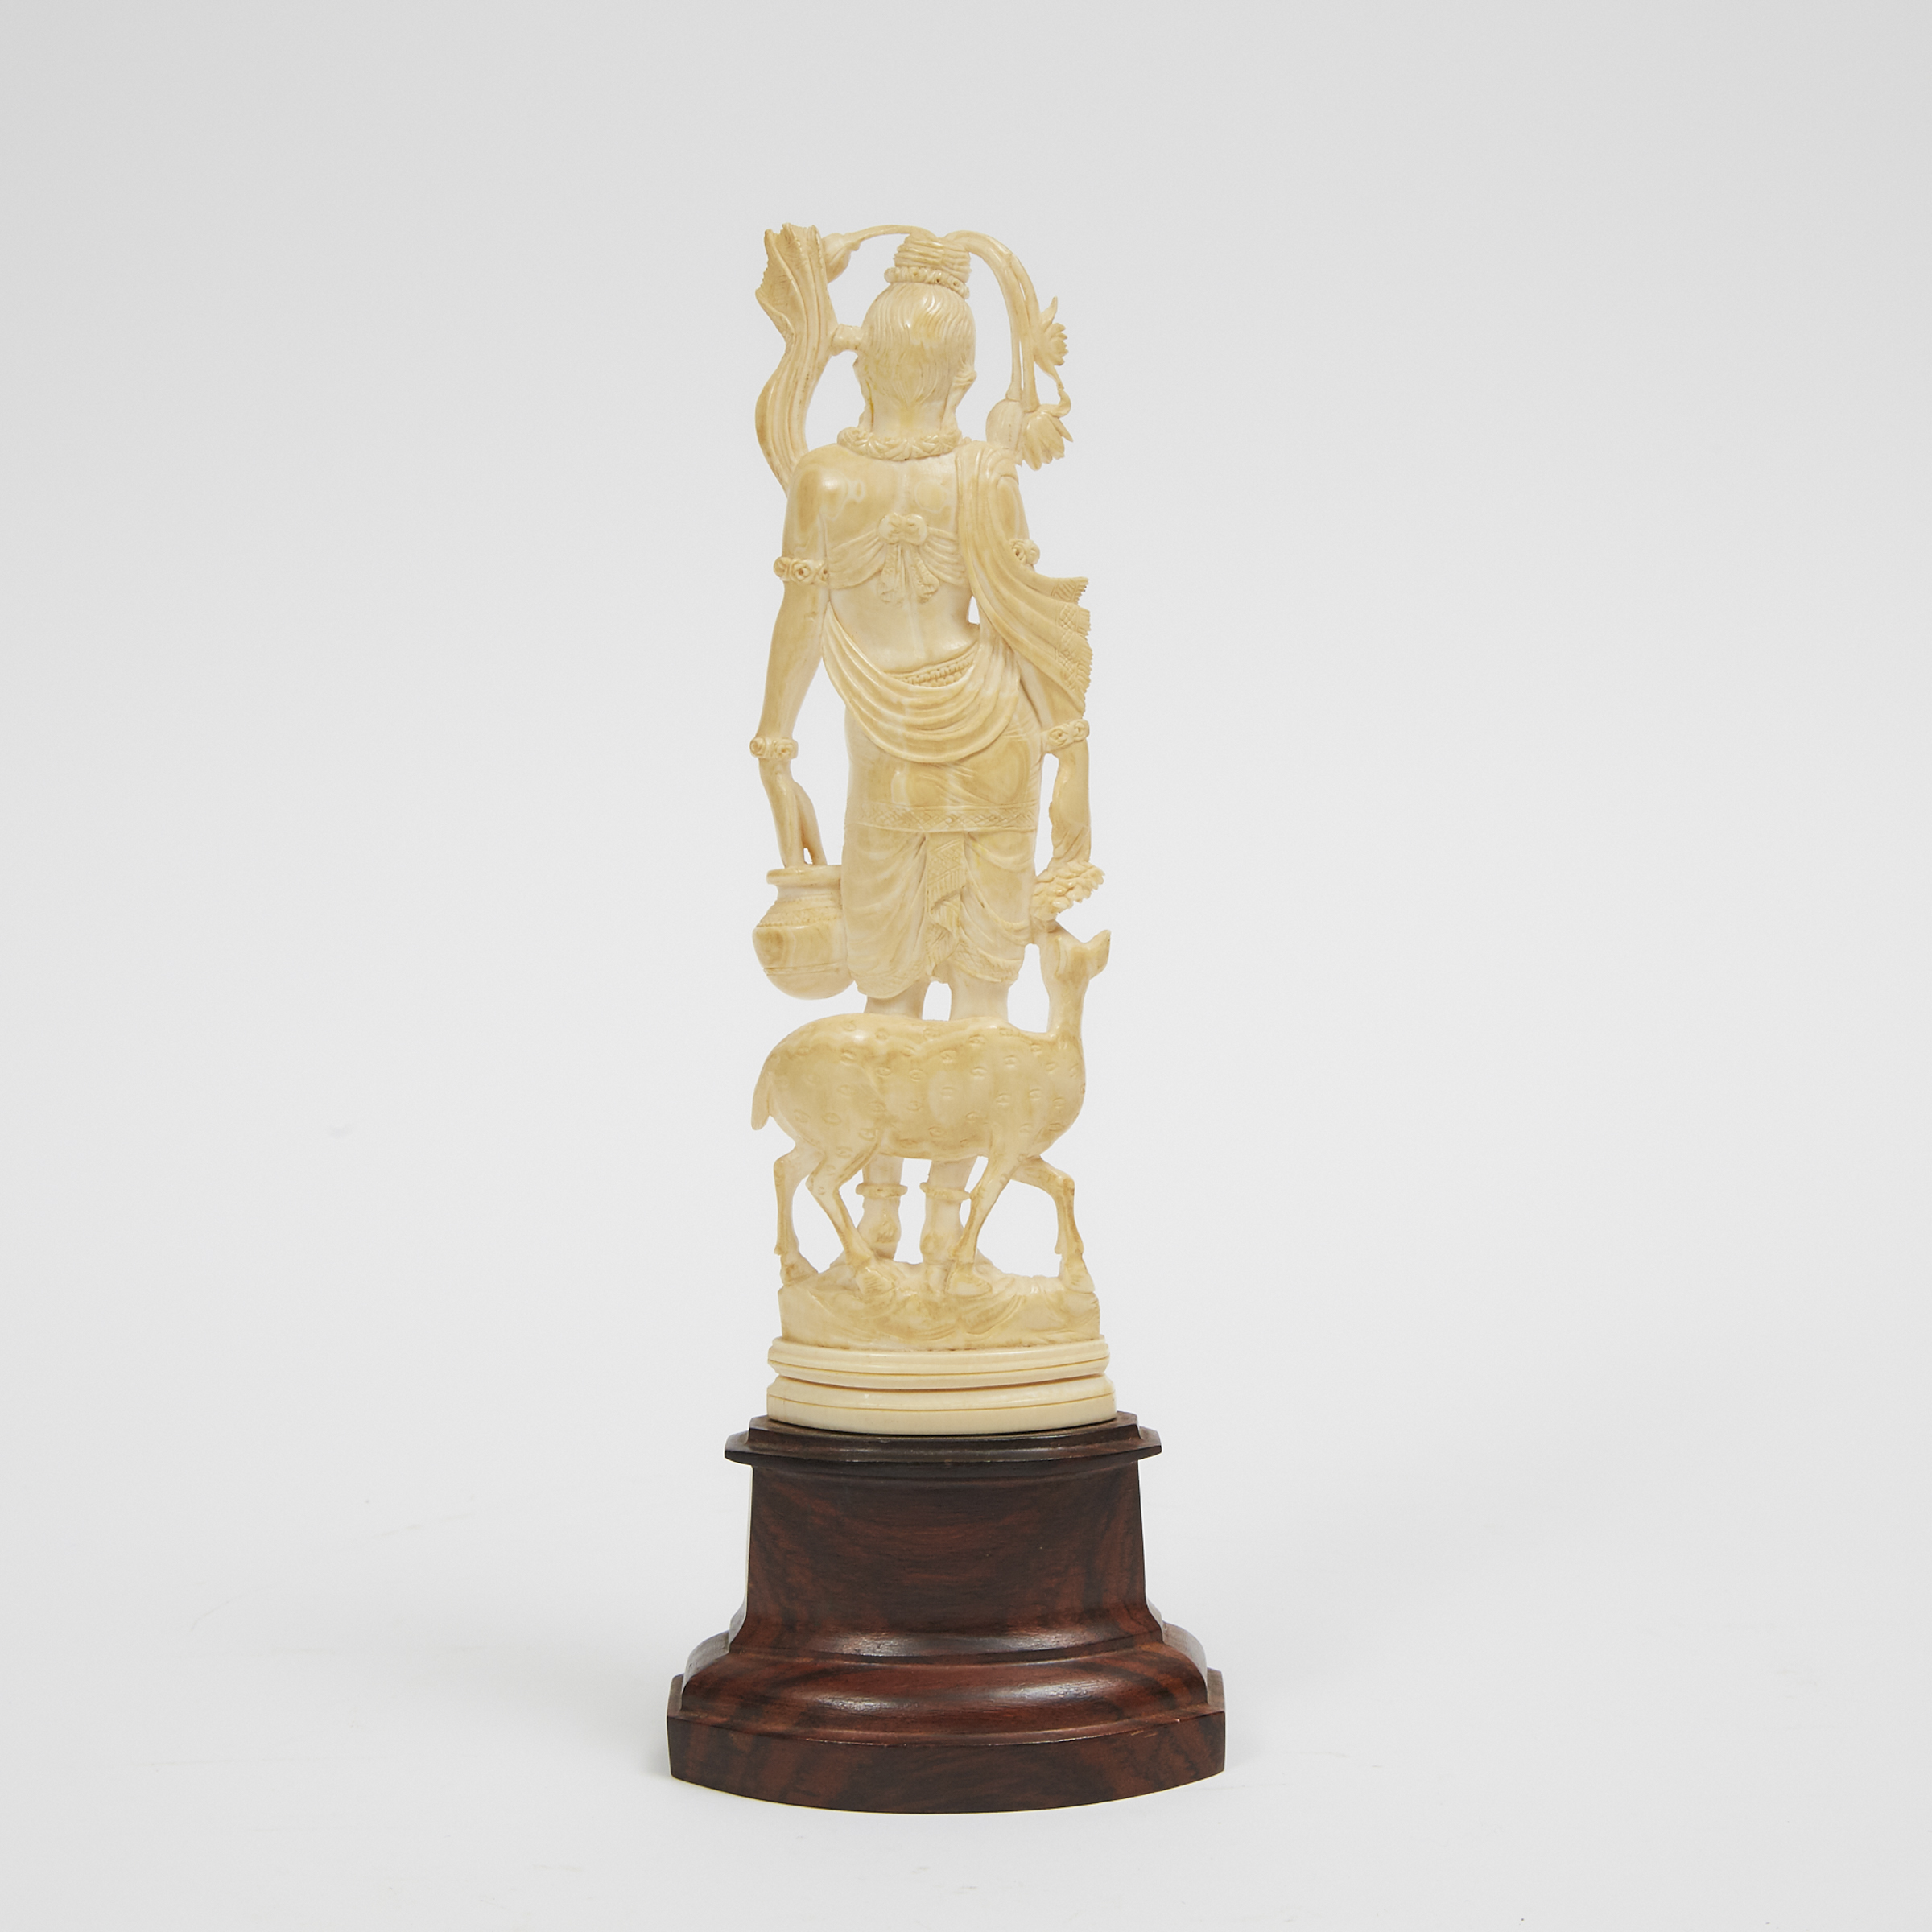 A Finely Carved Ivory Figure of Hindu Goddess with Deer